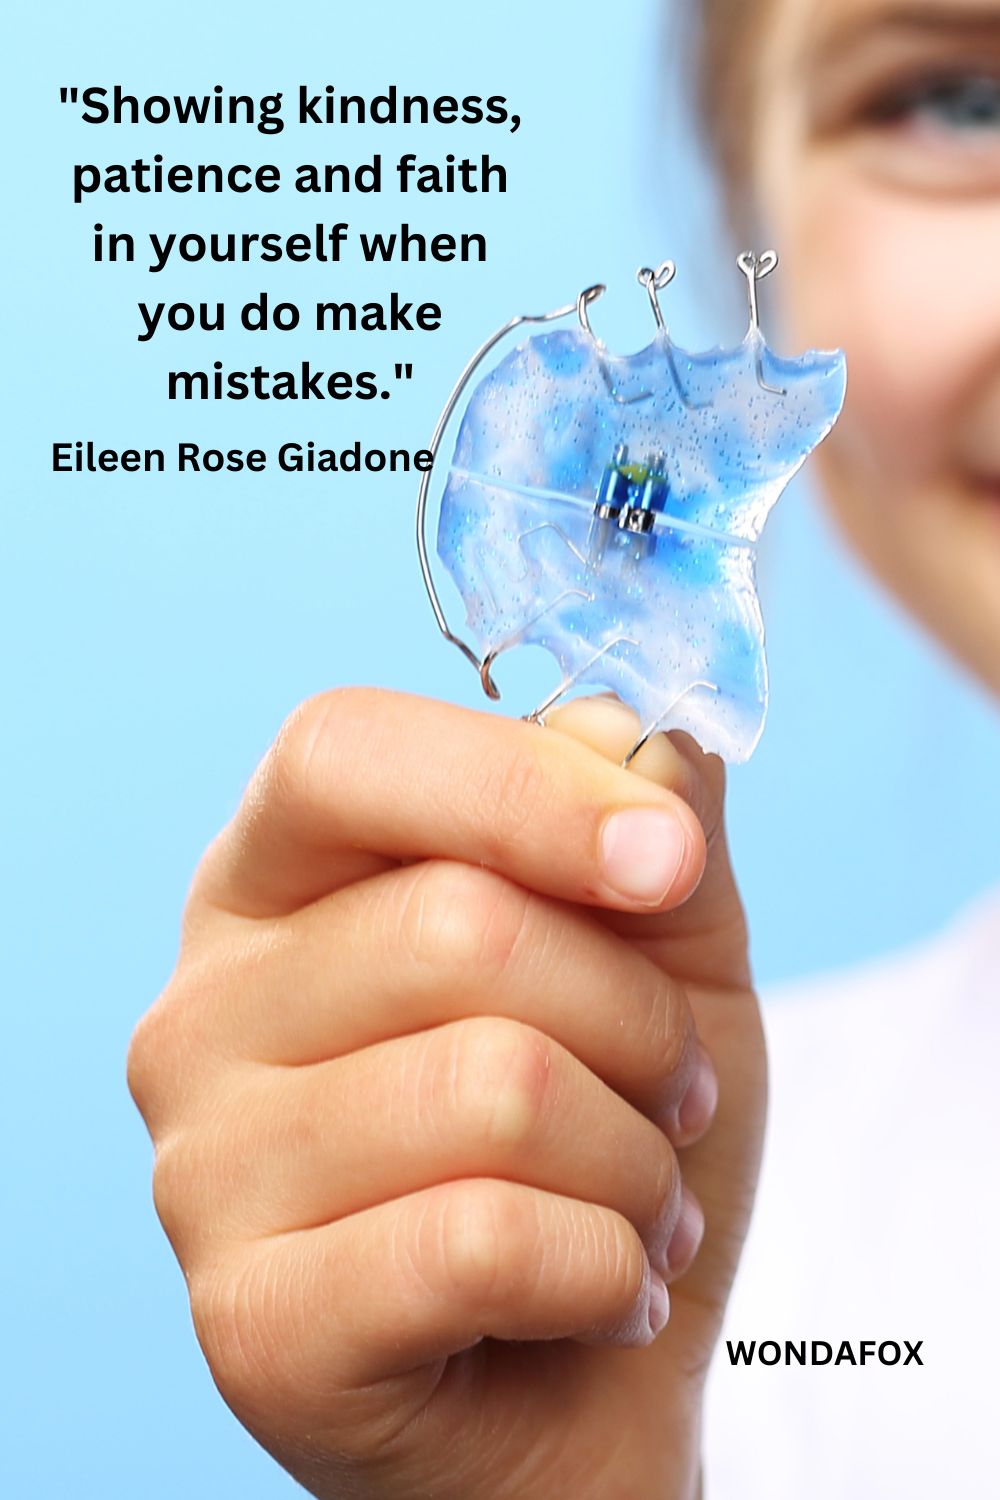 Showing kindness, patience and faith in yourself when you do make mistakes."
Eileen Rose Giadone